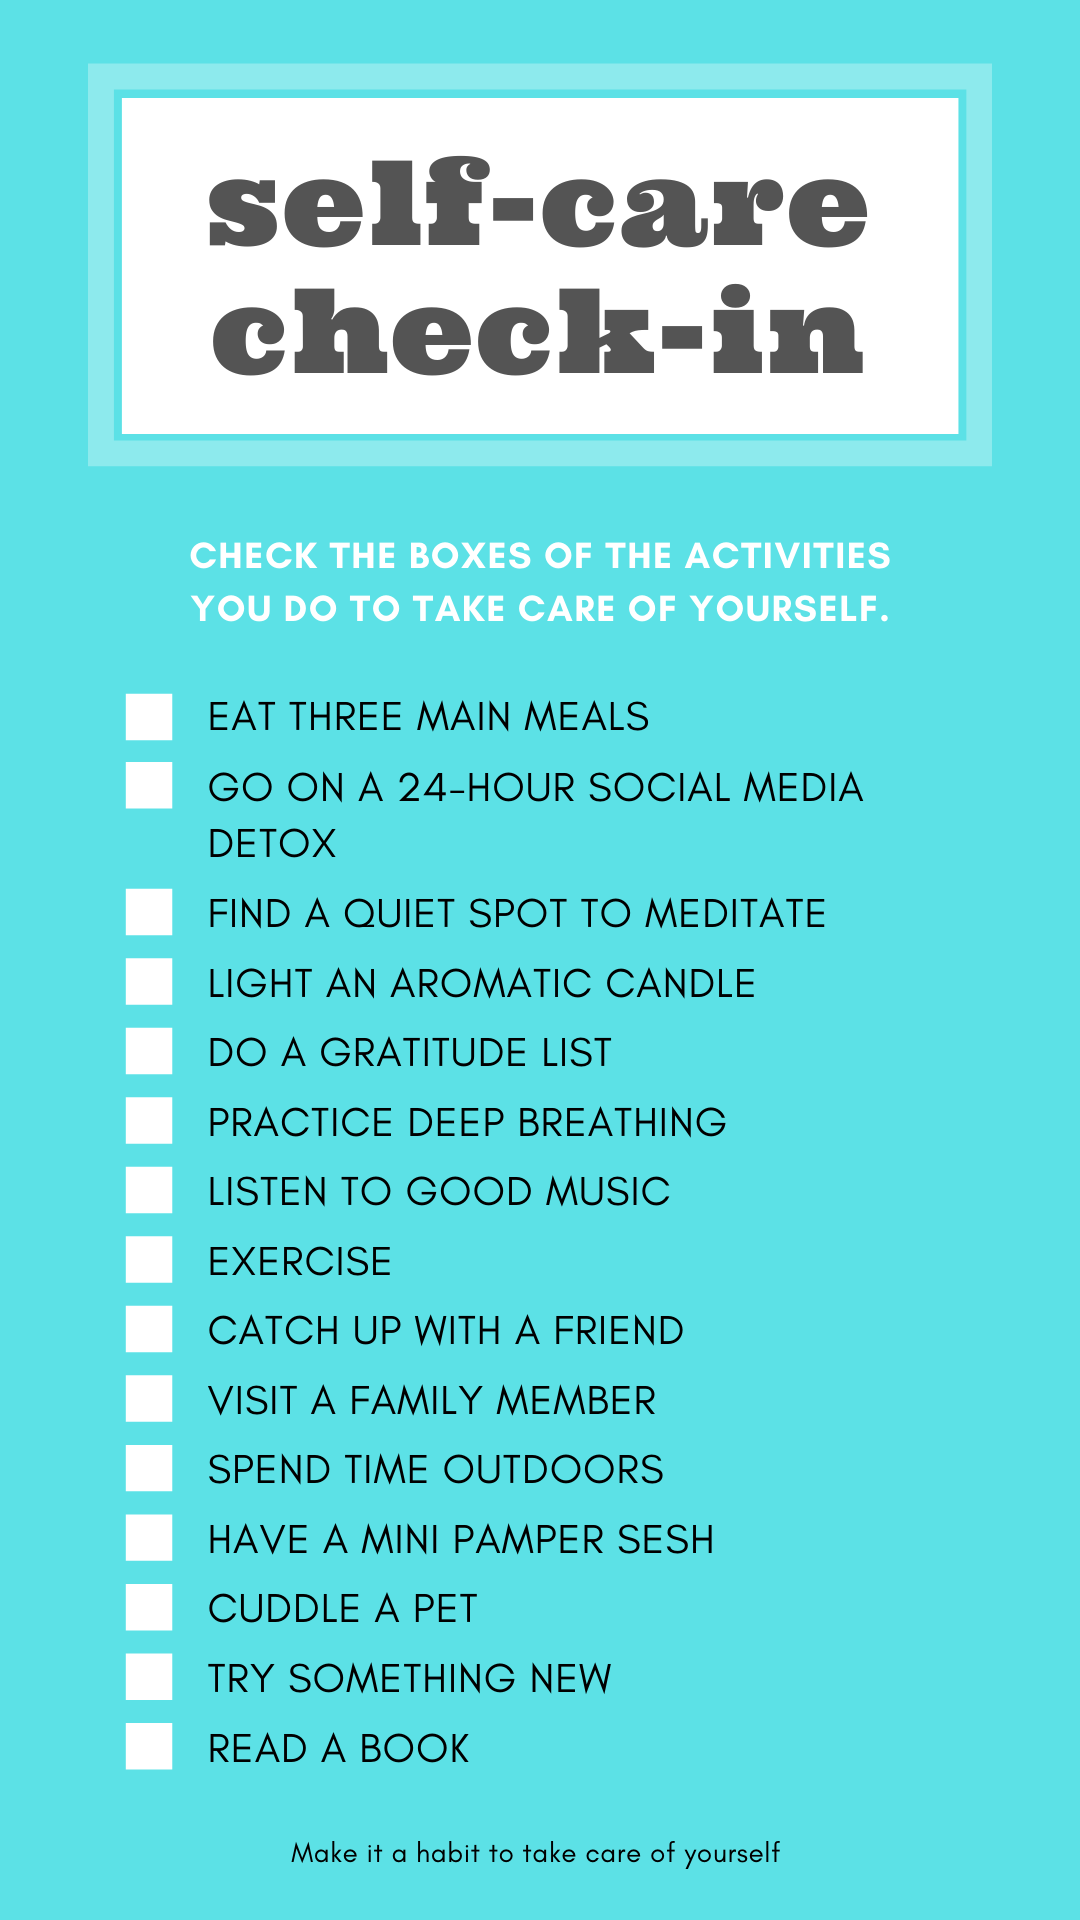 Photo of a blue box that contains a checklist of things to do to practice self-care.